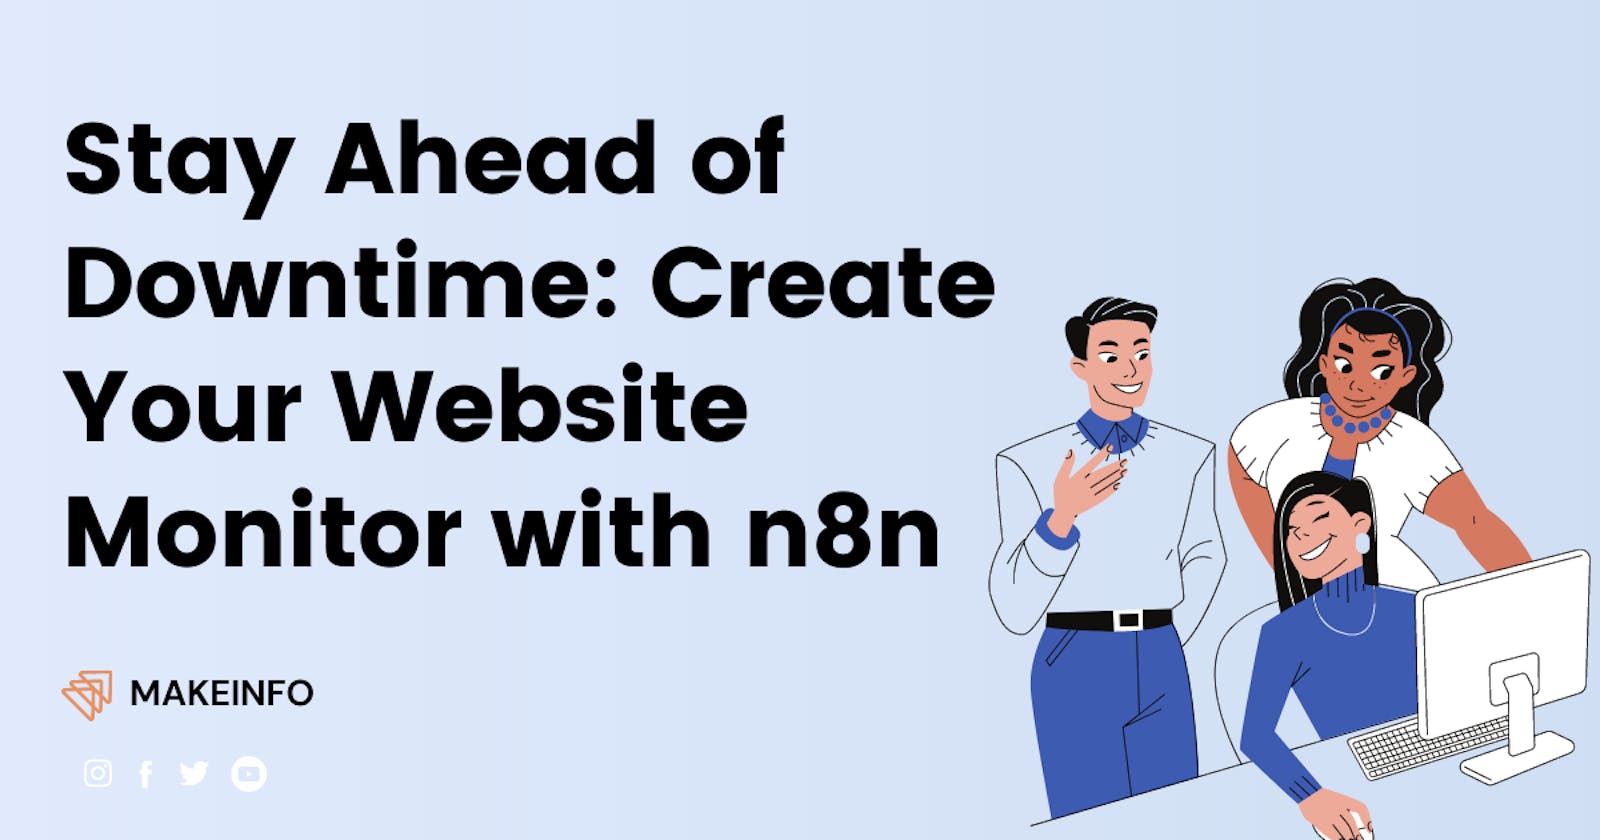 Create Your Website Downtime Monitor with n8n